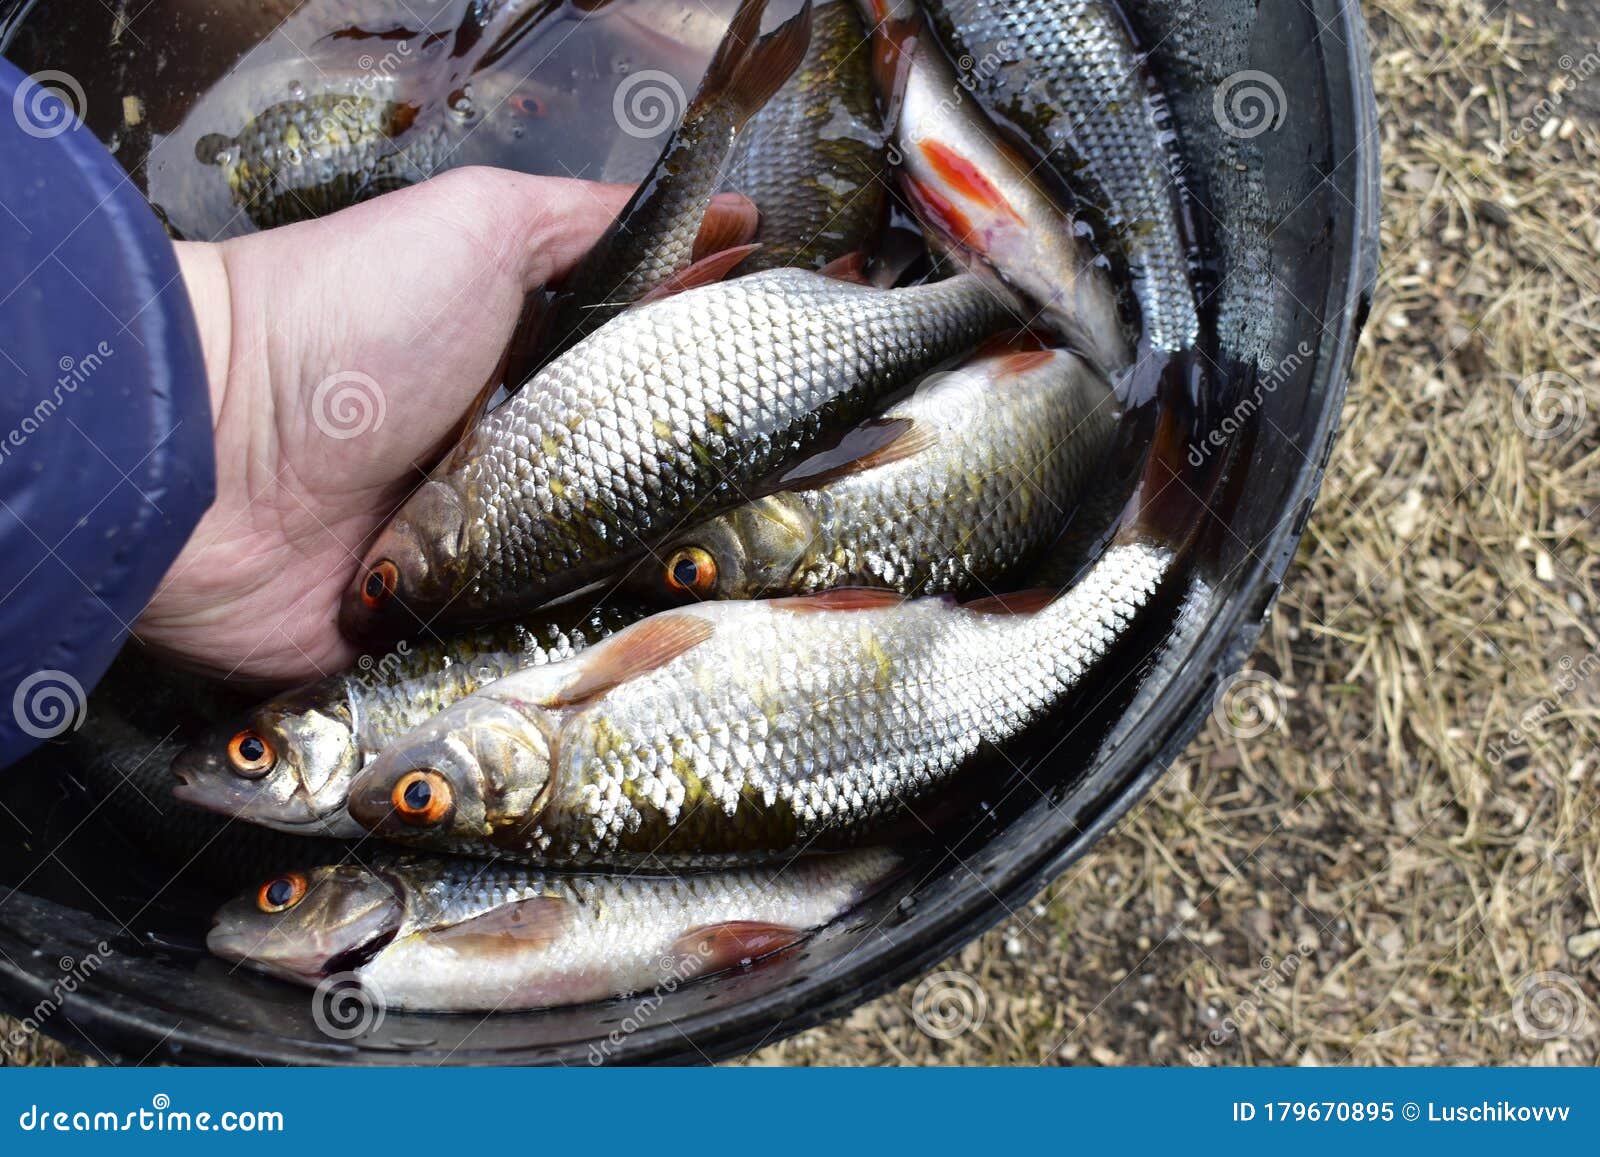 Different Freshly Caught River Fish in the Summer Stock Image - Image of  omega, basin: 179670895